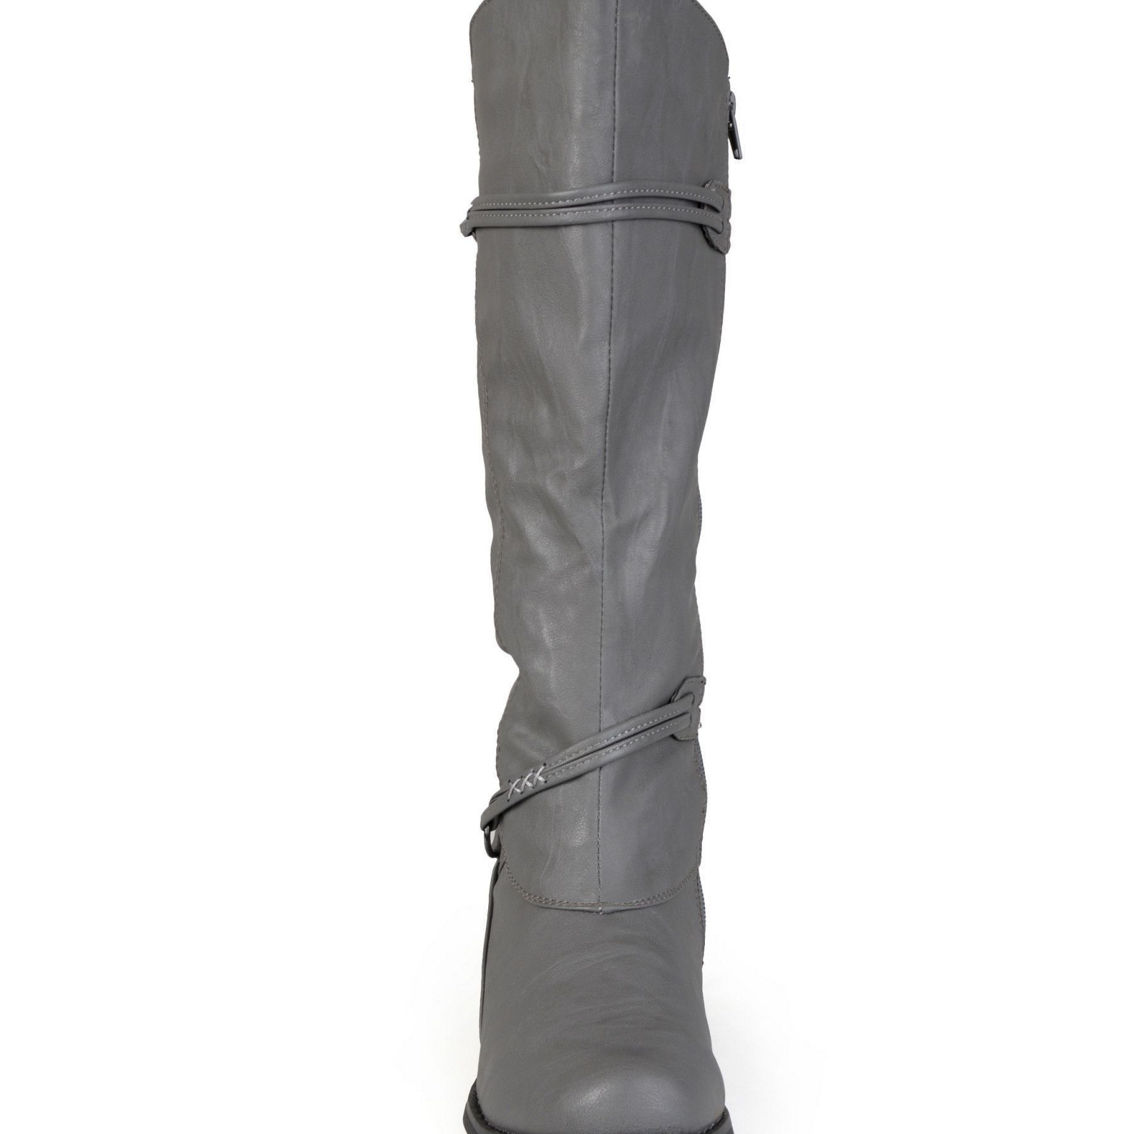 Journee Collection Women's Harley Boot - Image 2 of 5